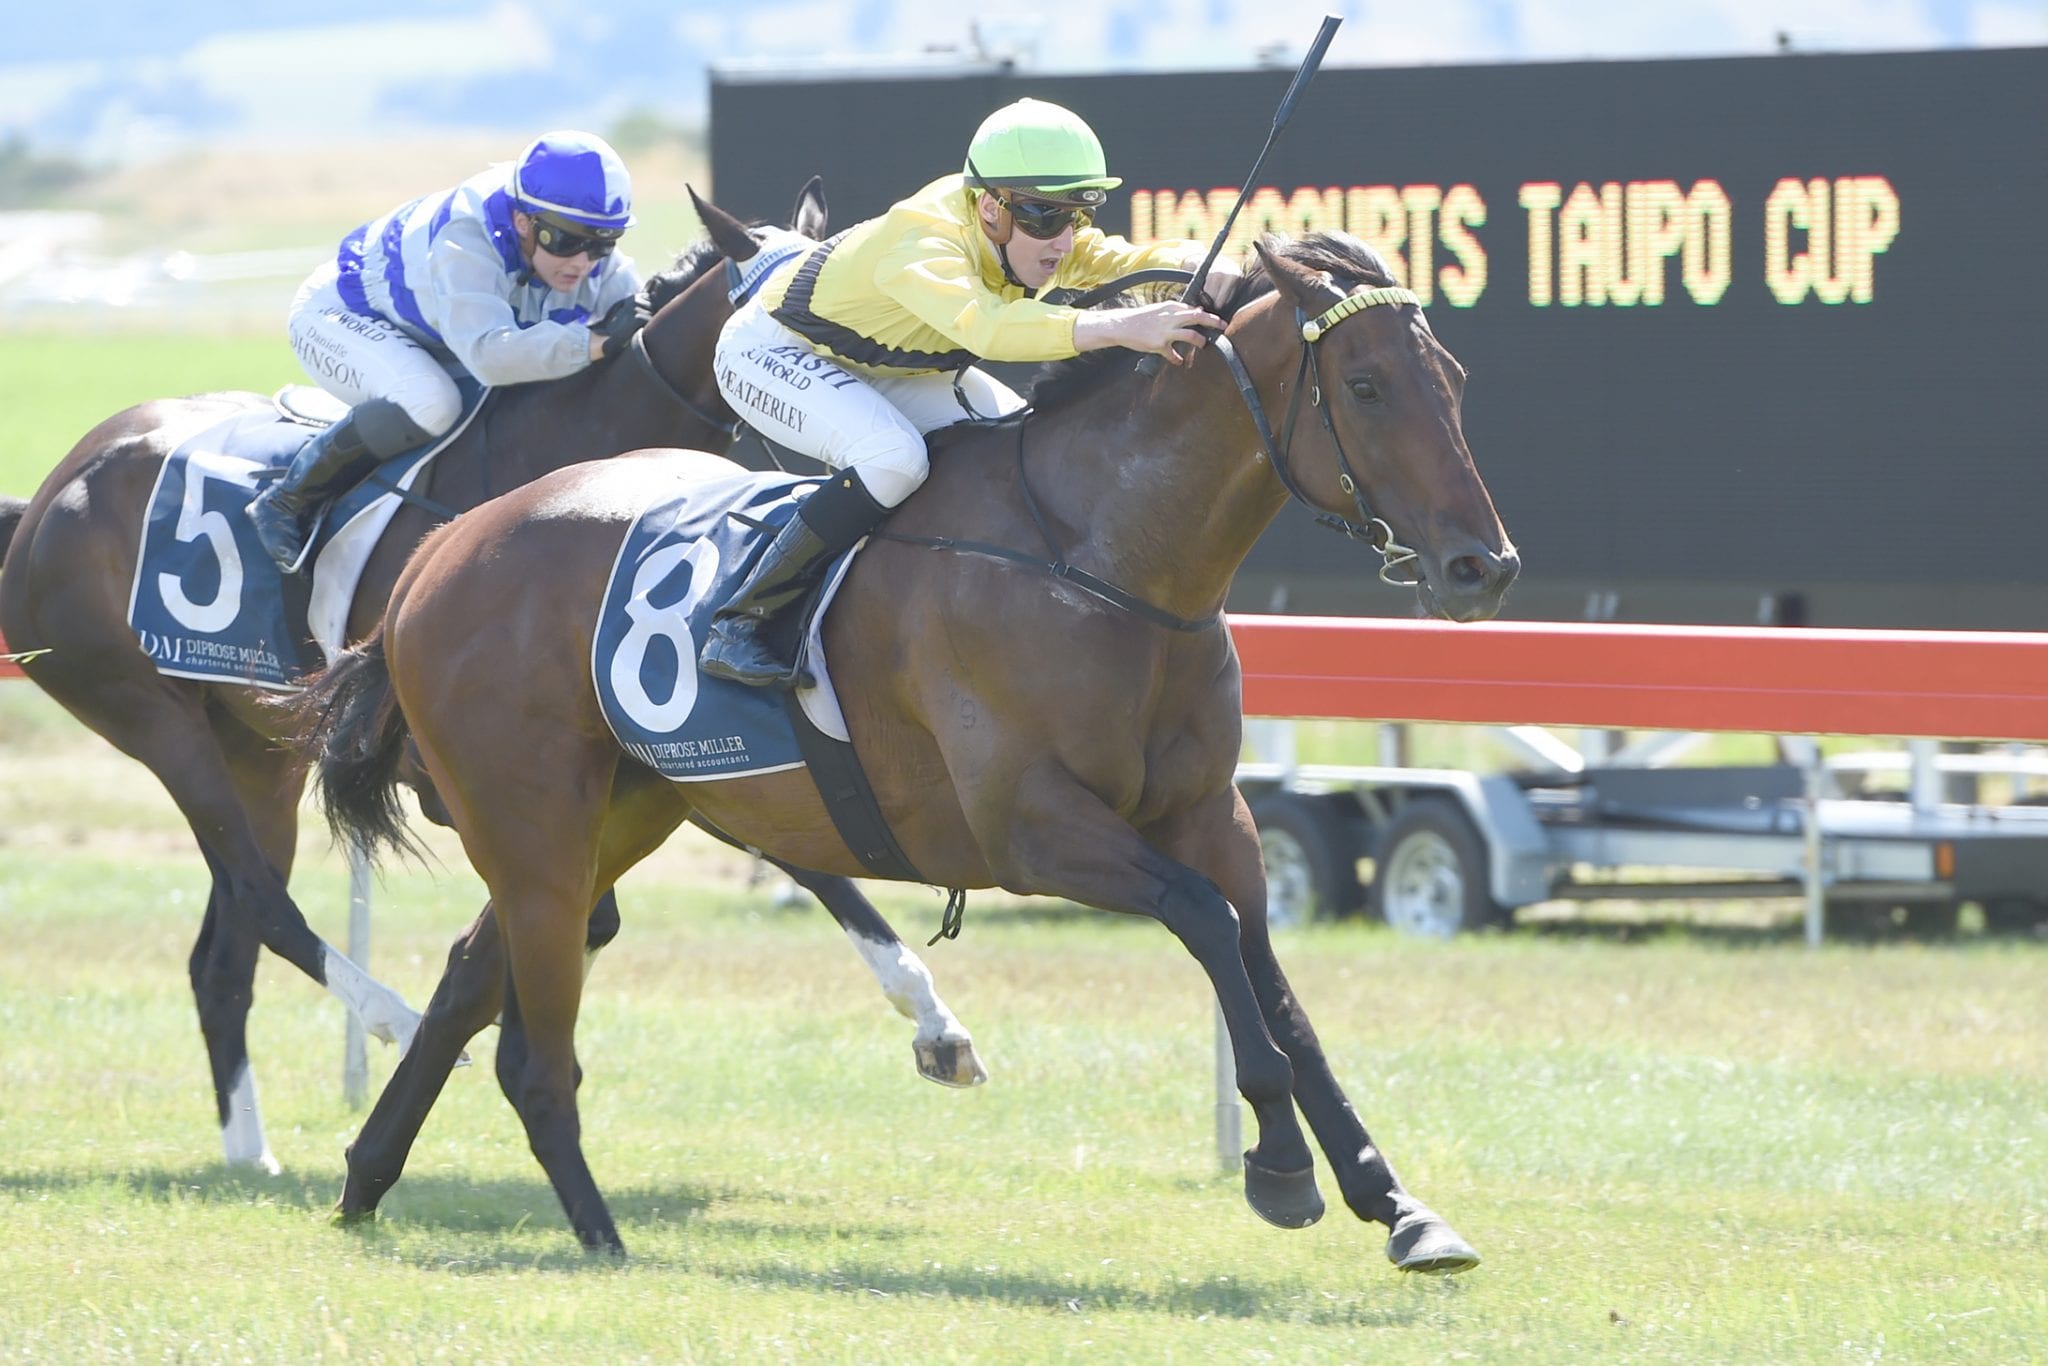 Star filly back in work as Hillis takes one runner to Ruakaka